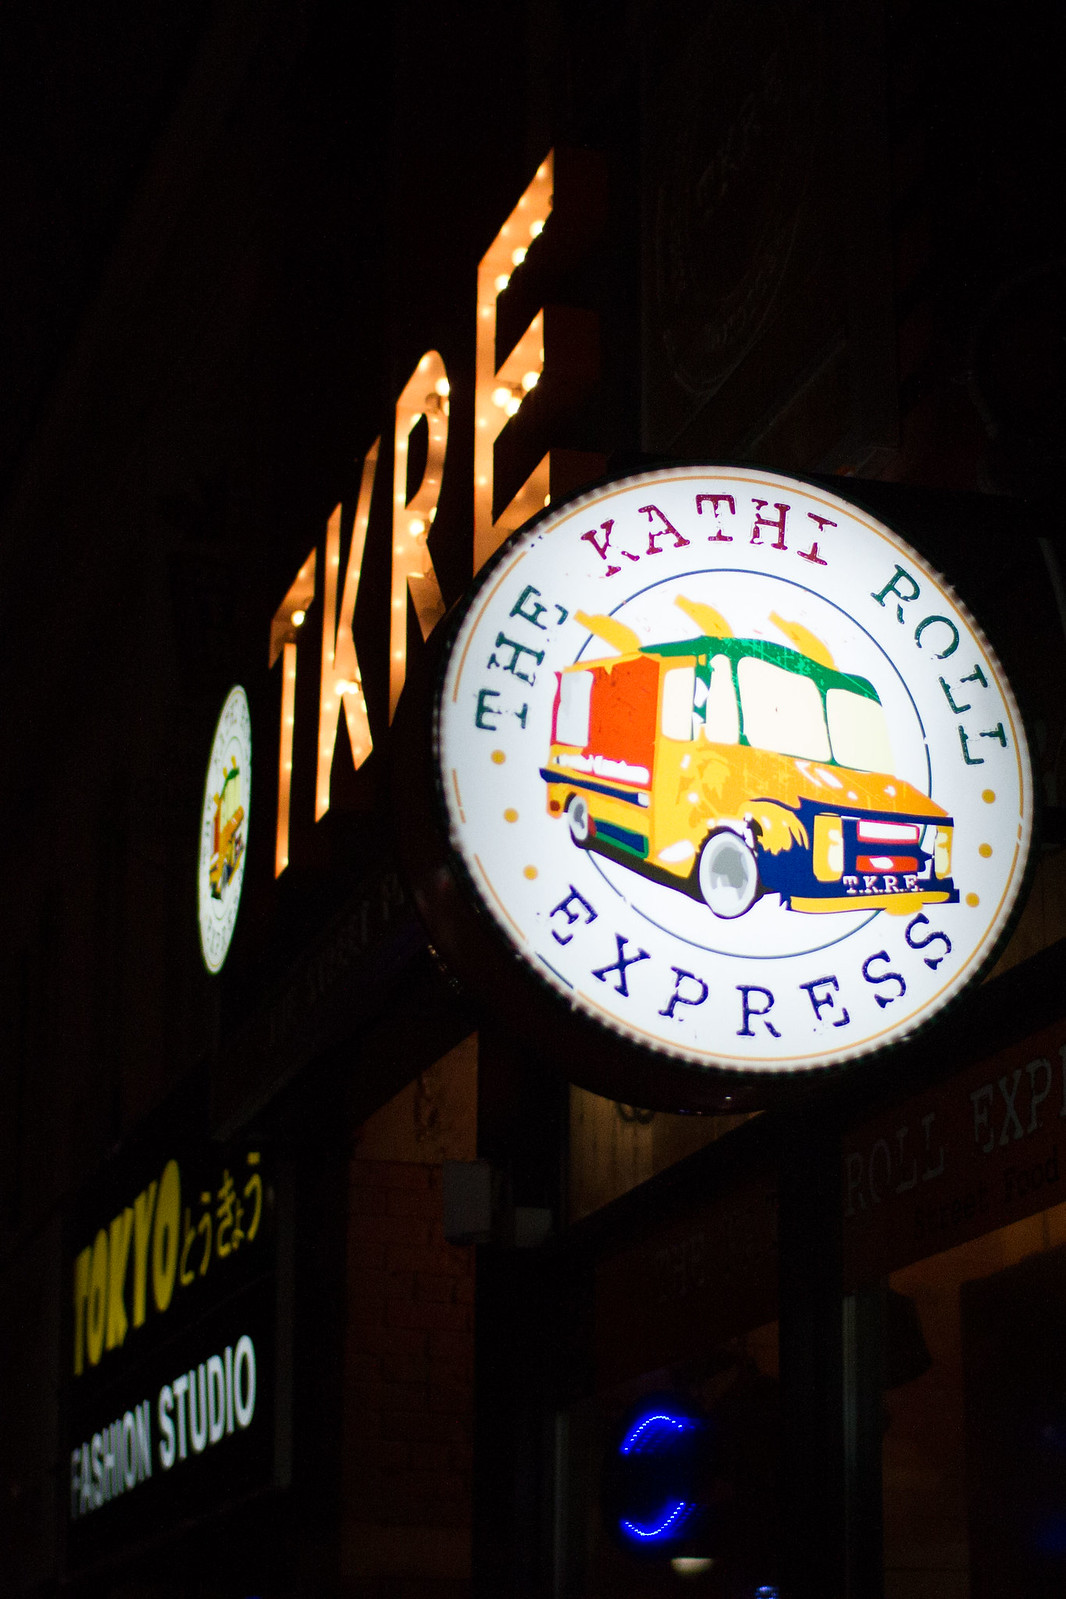 The Kathi Roll Express